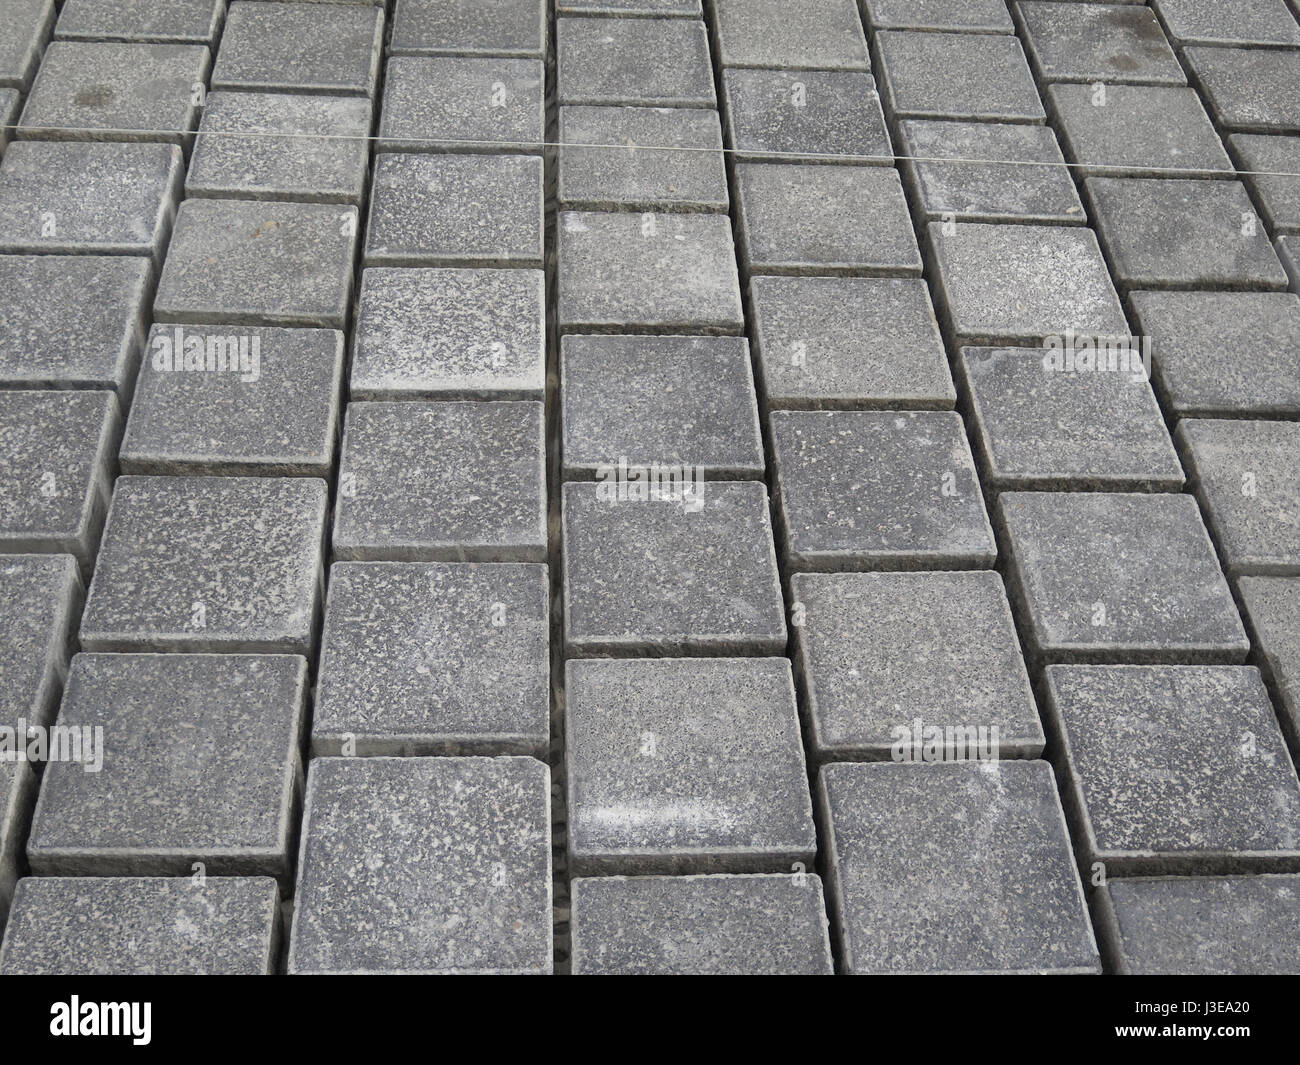 Square paving stones awaiting grouting in village street in Andalusia Stock Photo